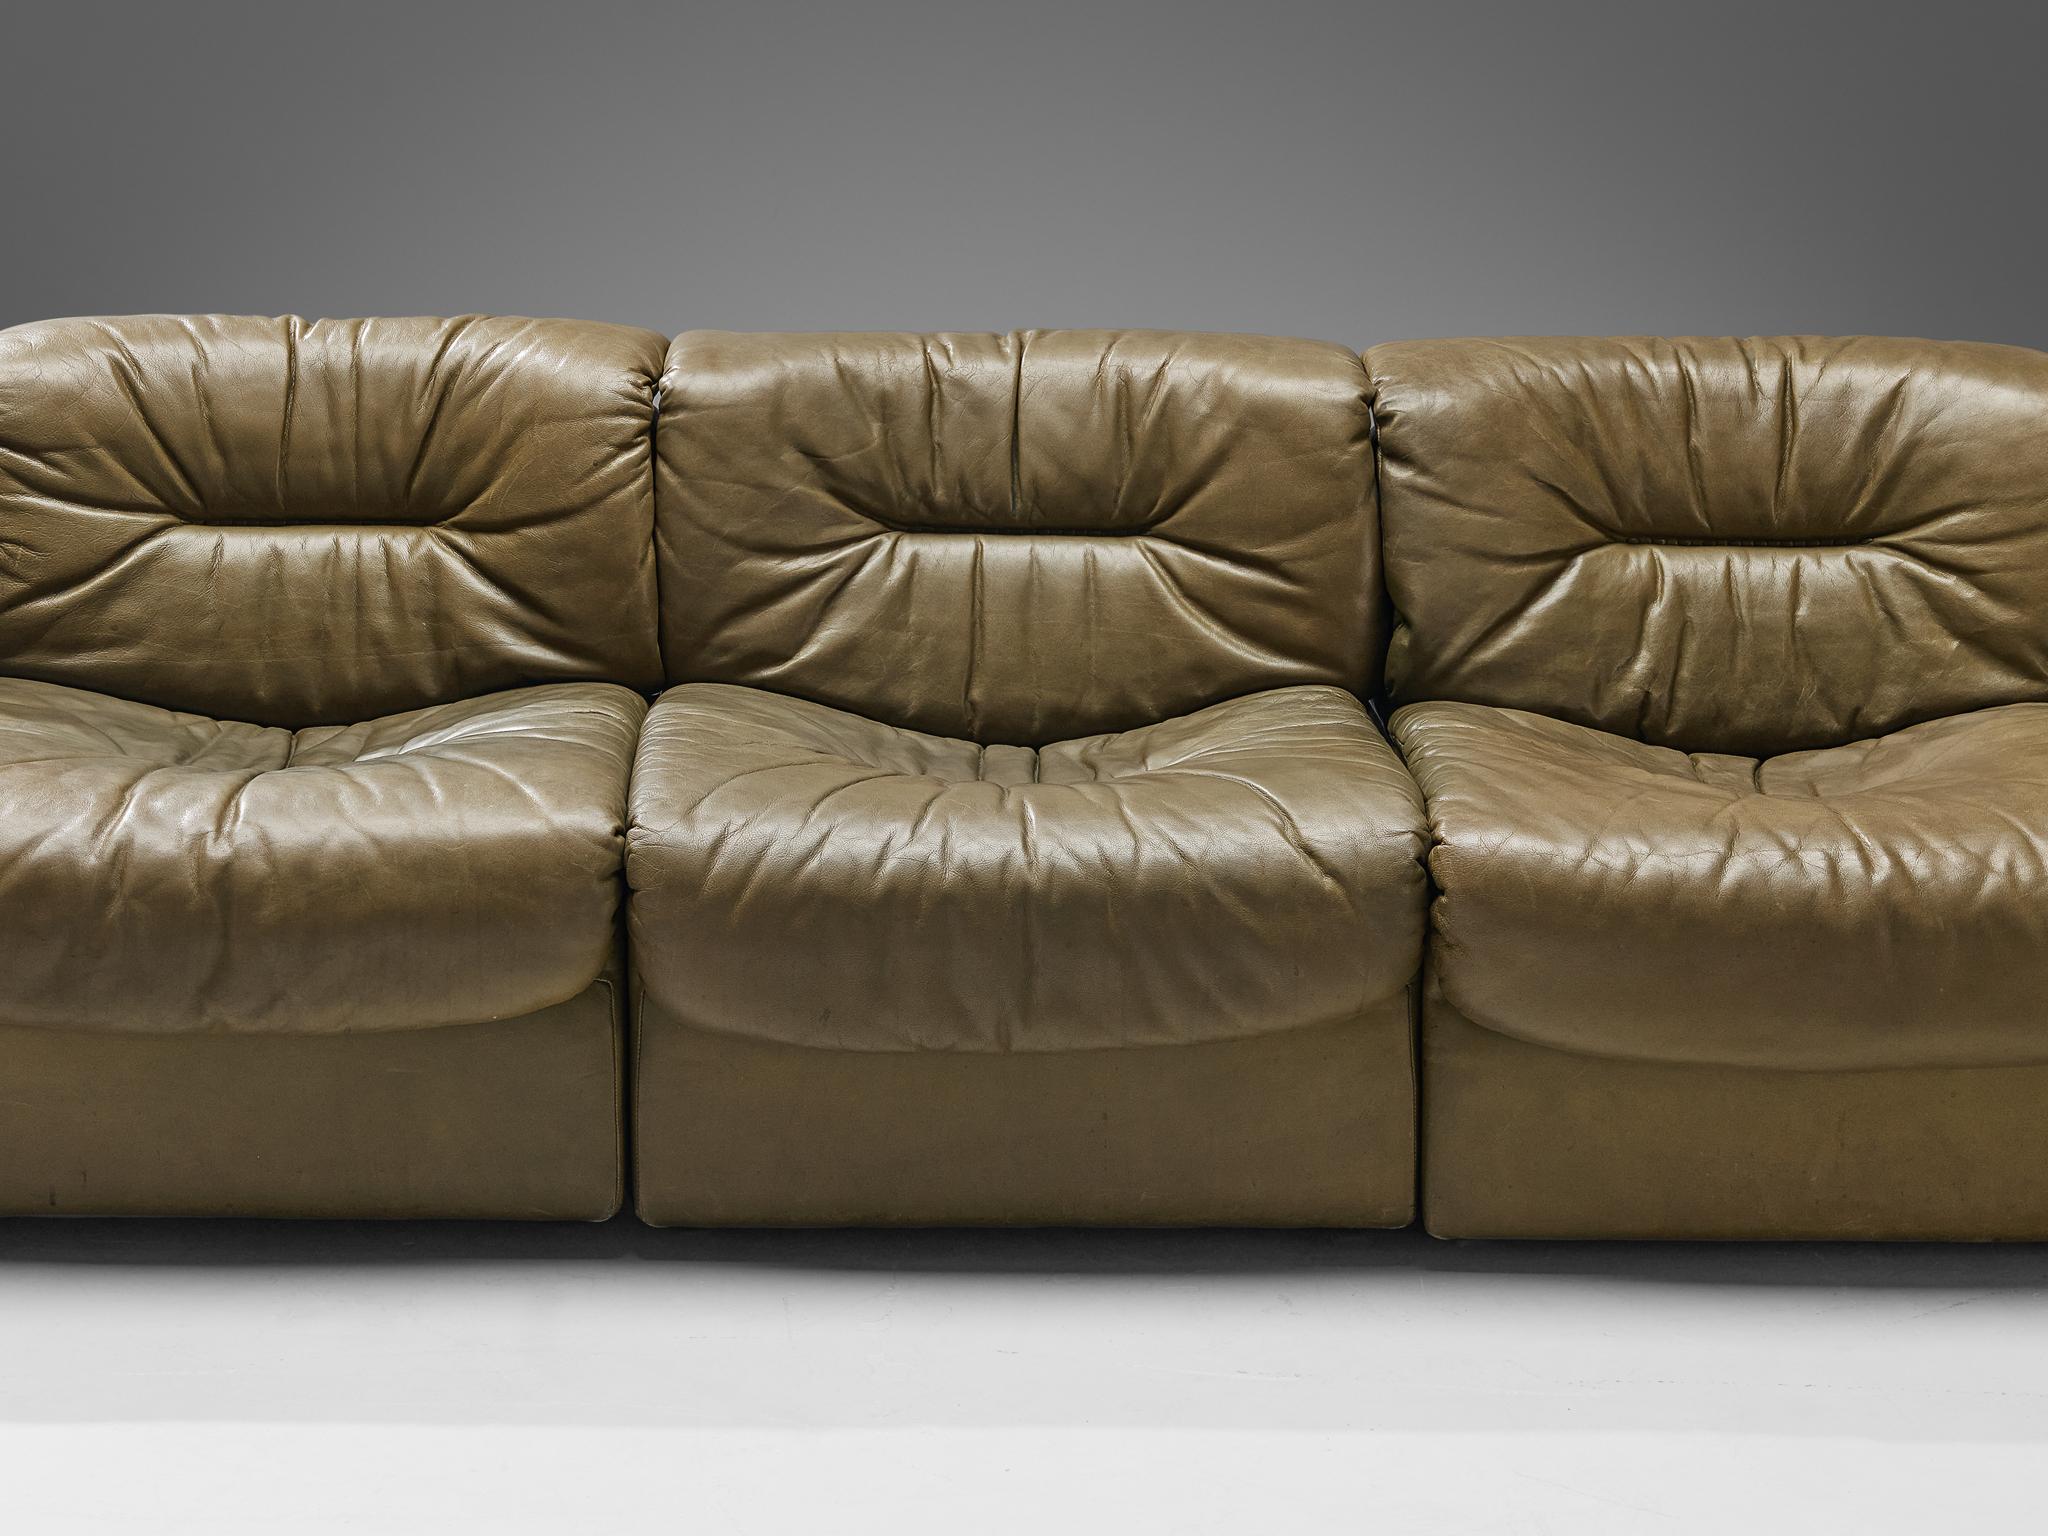 De Sede 'DS-14' Modular Sofa in Patinated Olive Green Leather 2